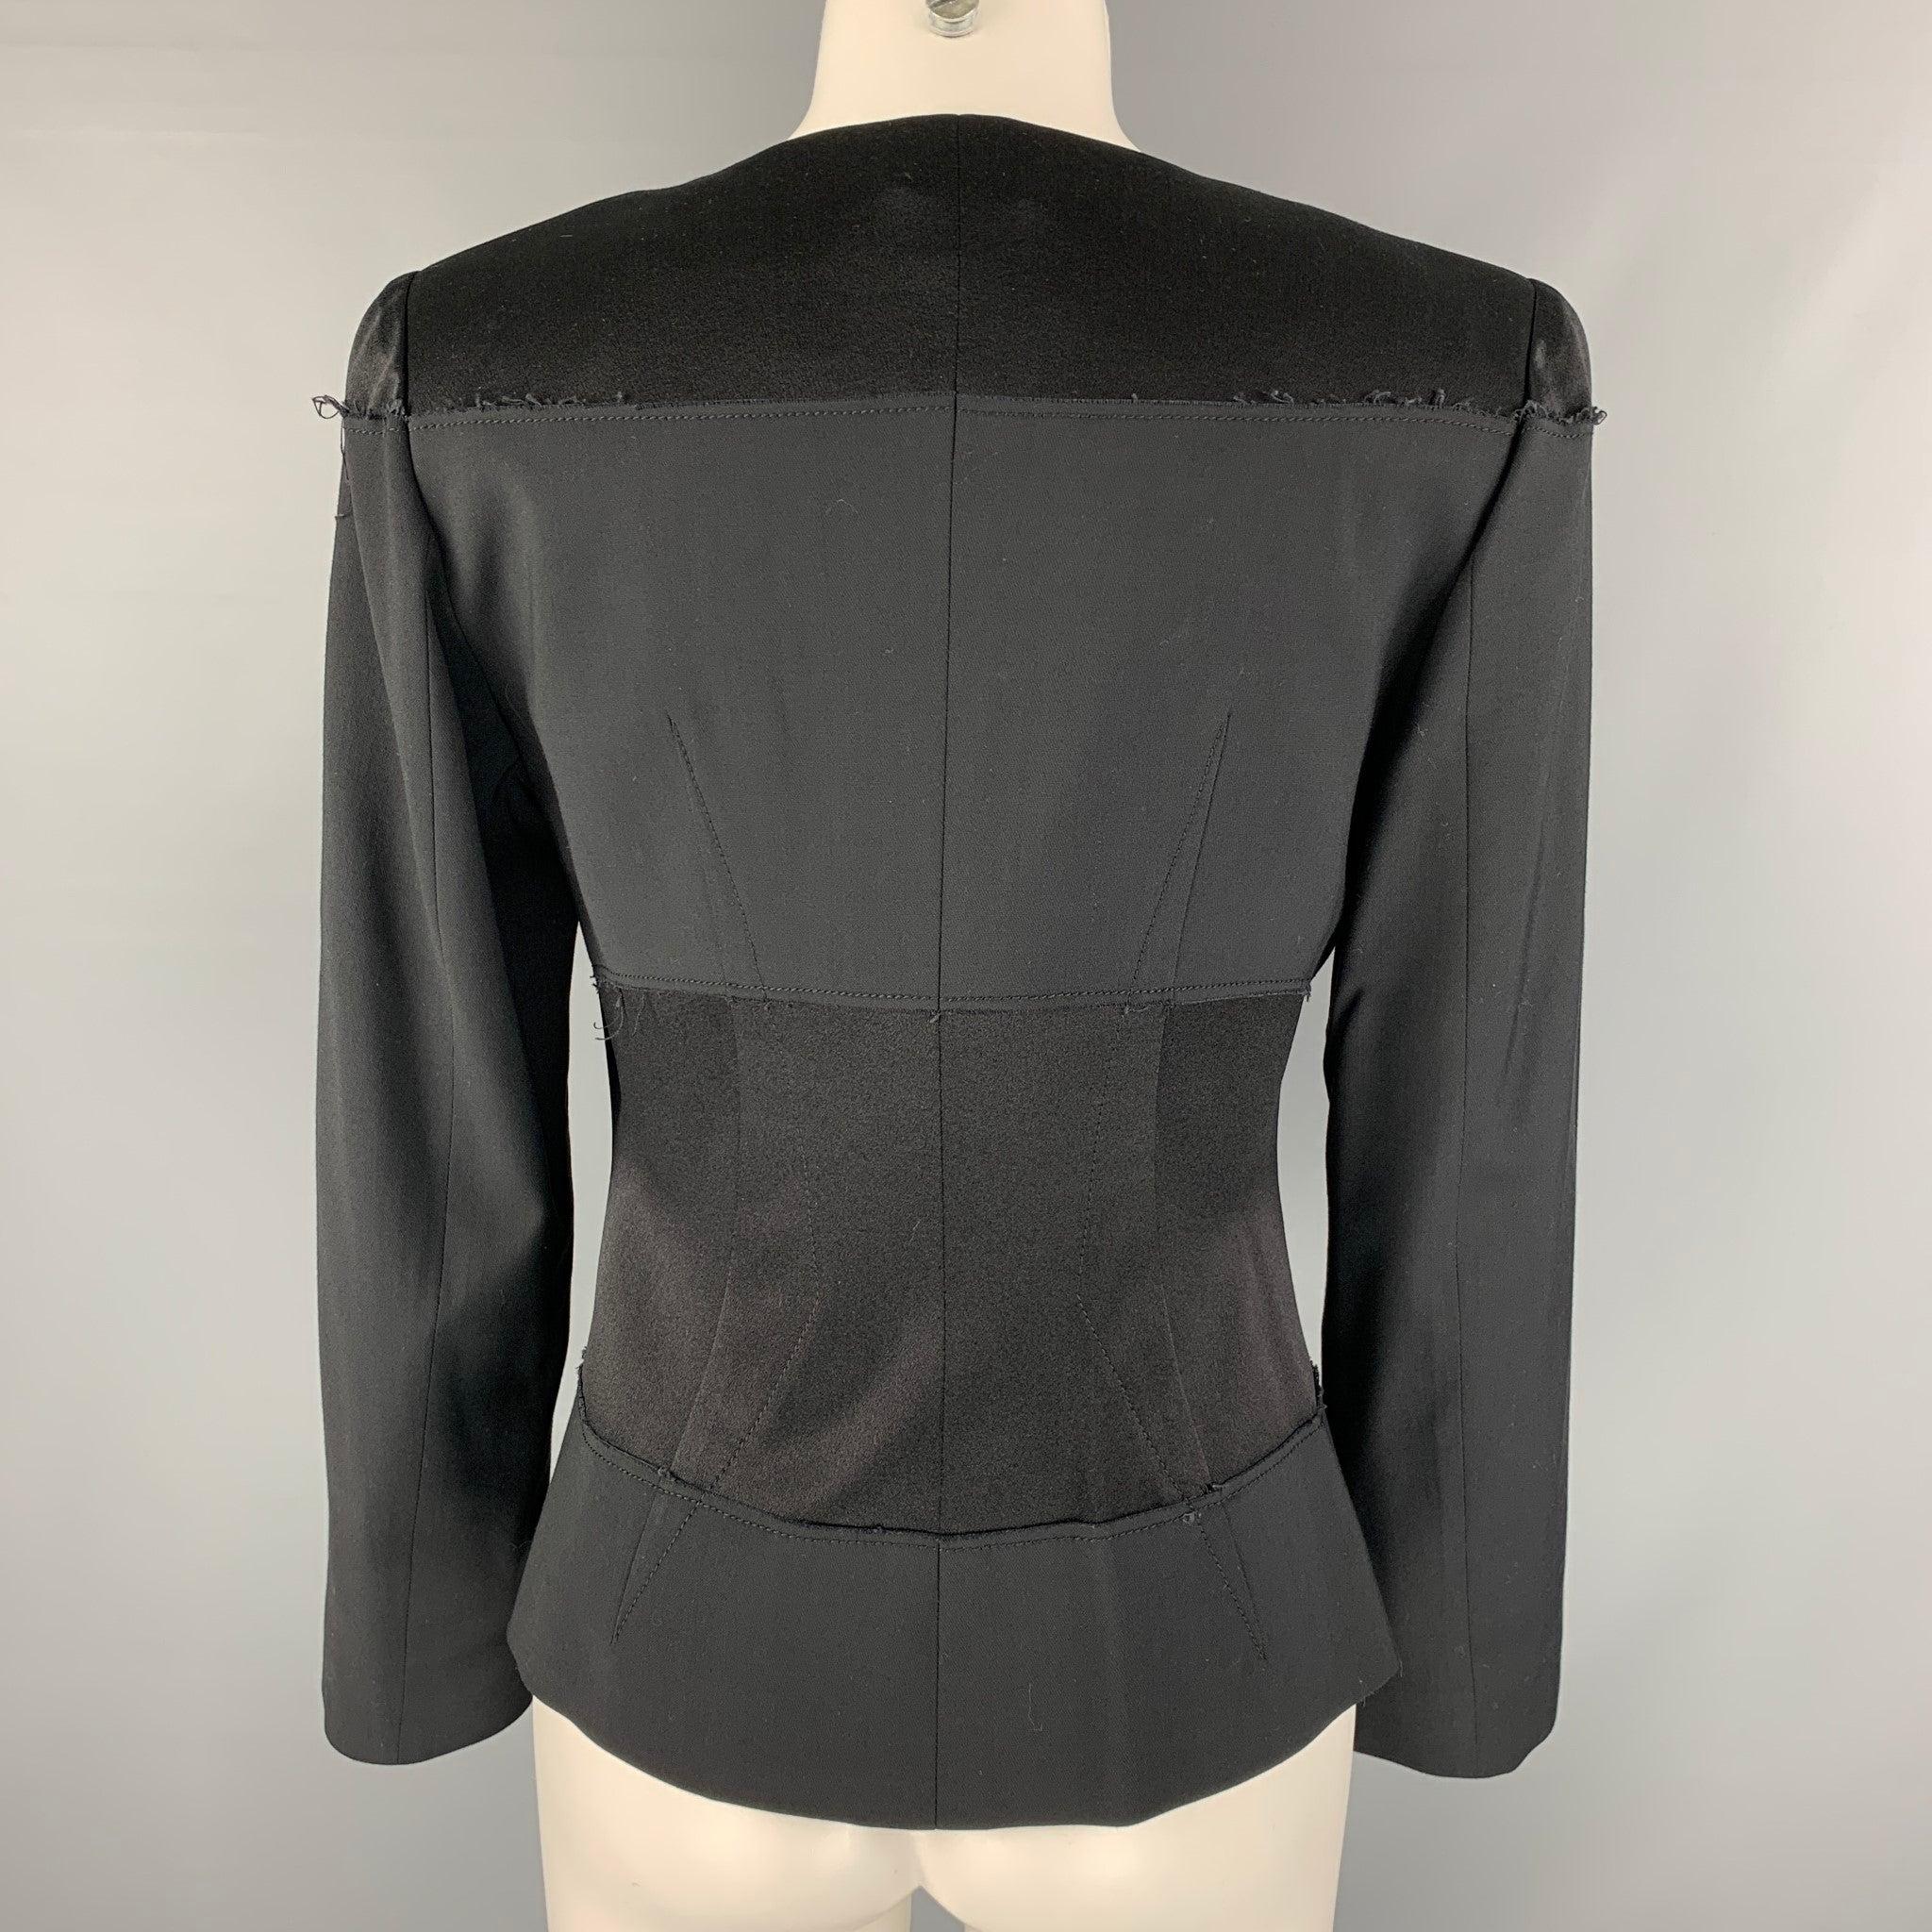 ALBERTA FERRETTI Size 8 Black Rayon Blend Hidden Snaps Jacket In Good Condition For Sale In San Francisco, CA